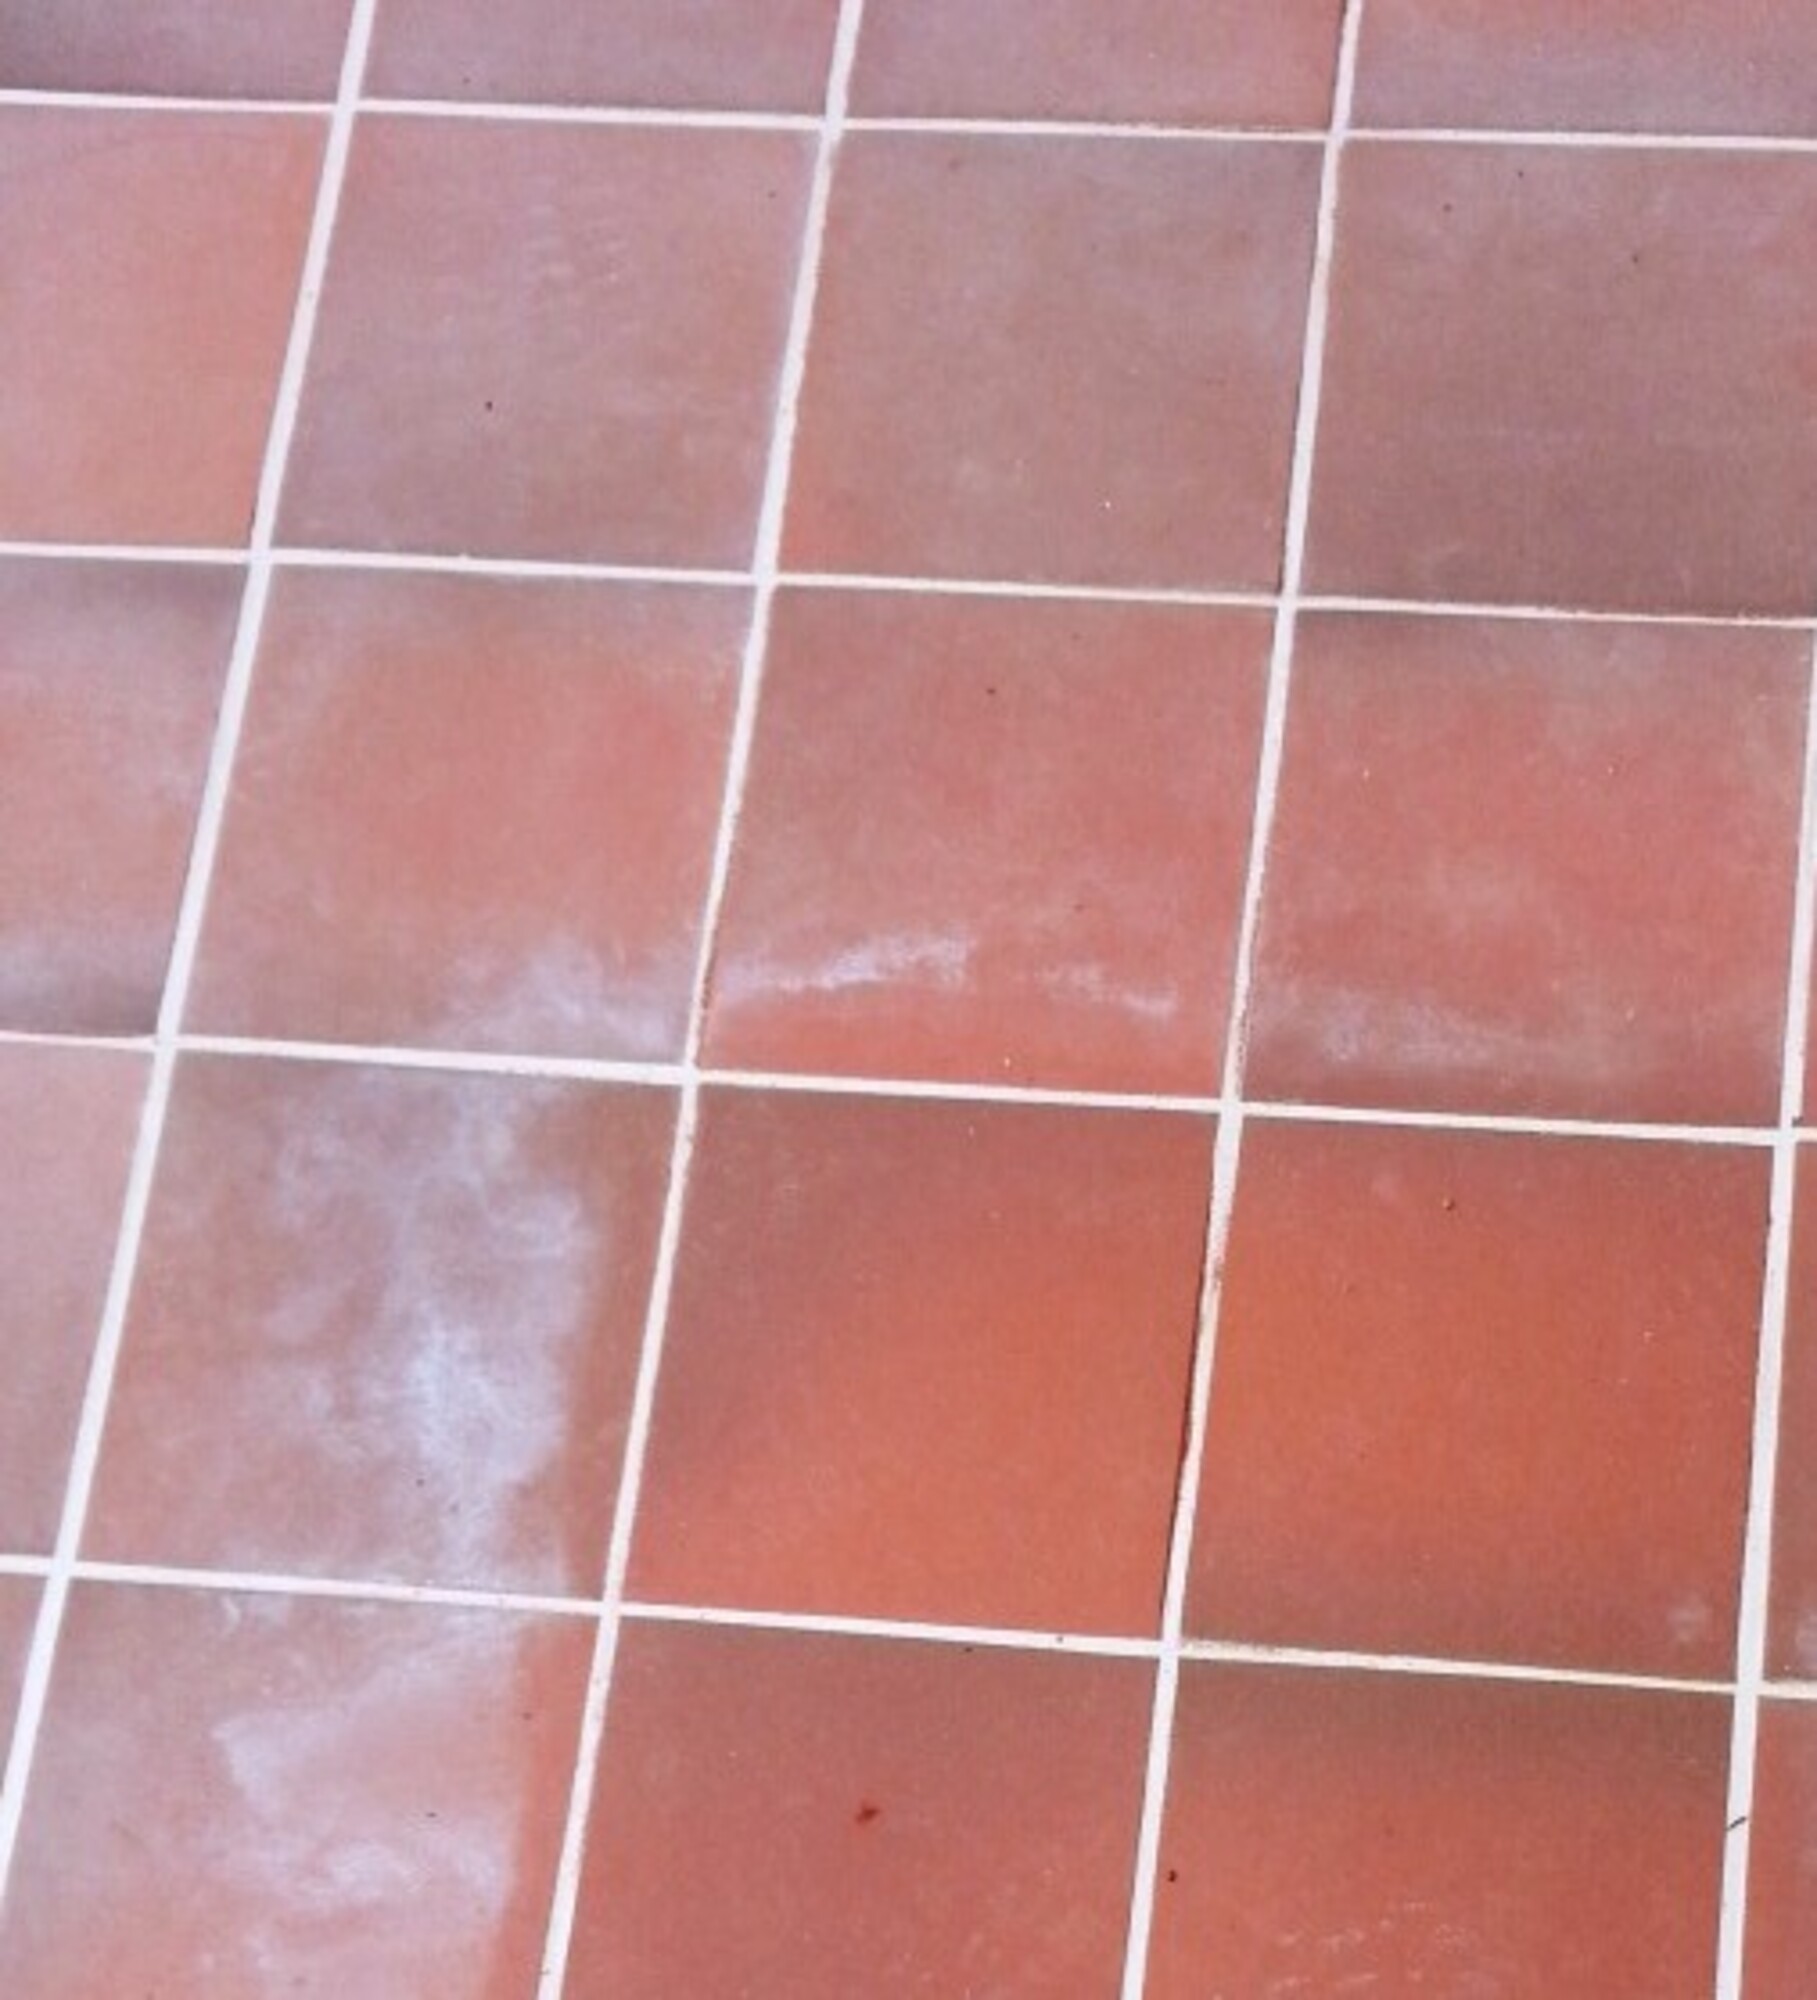 Grout Haze Remover Residue, How To Get Grout Glue Off Tiles